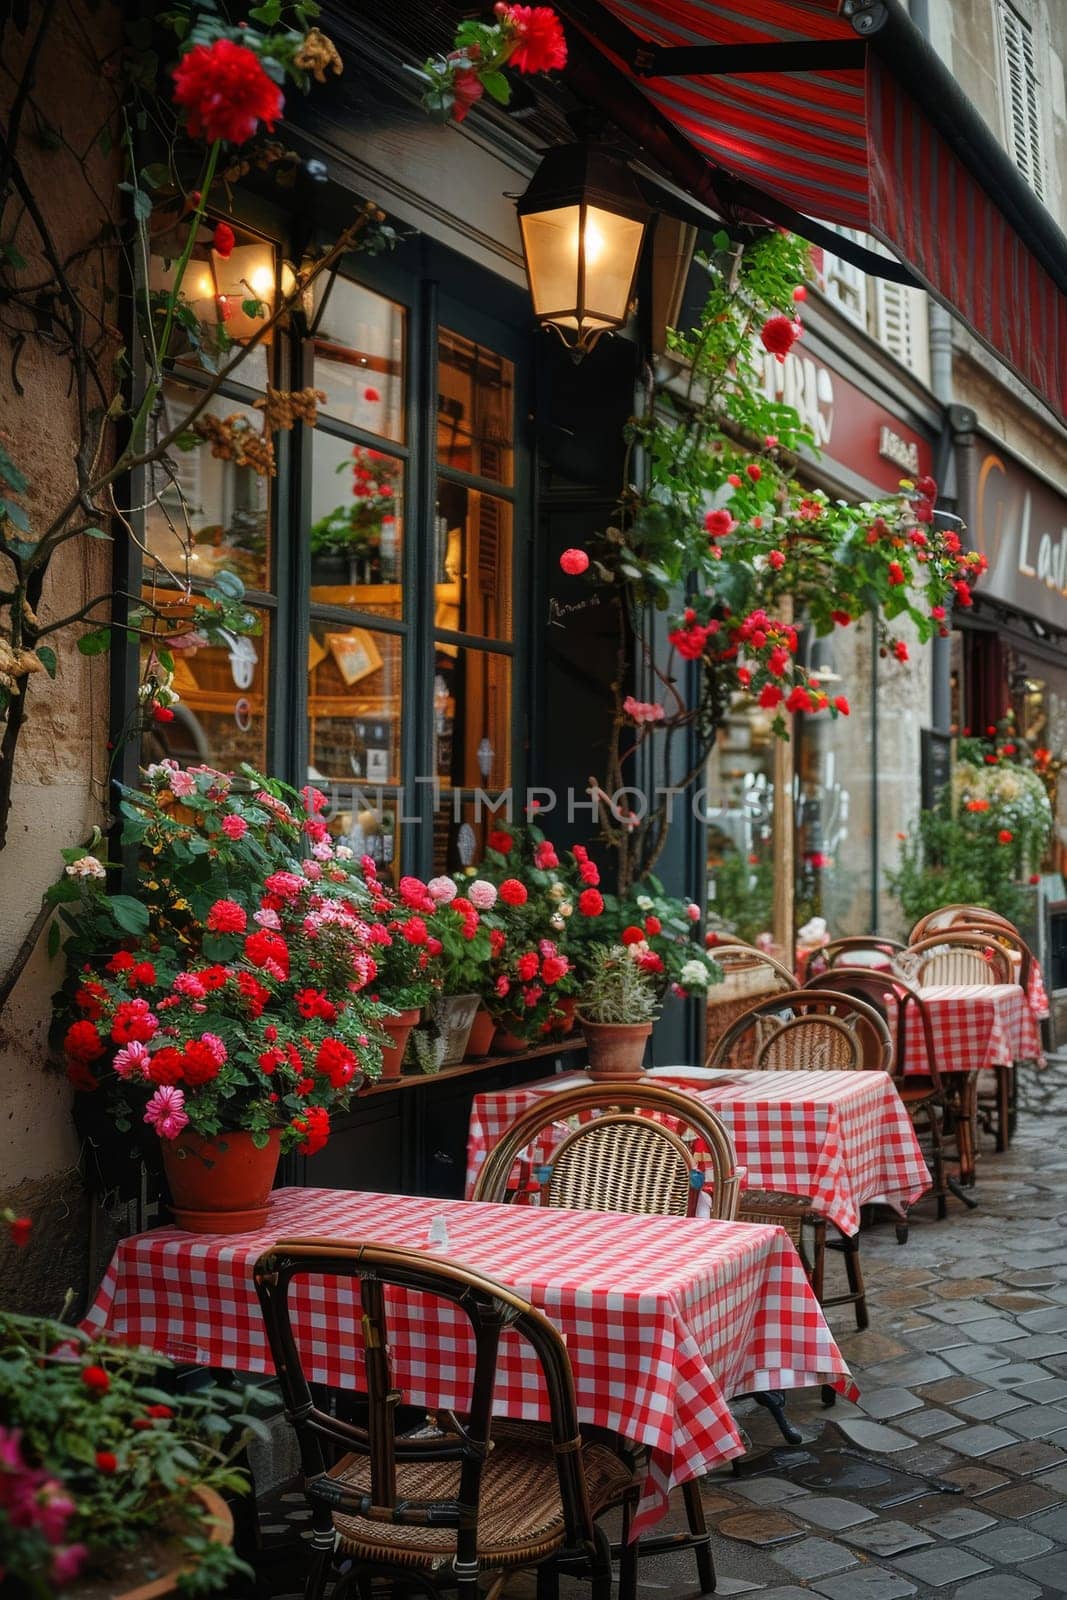 A restaurant with red and white checkered tablecloths and chairs. The tables are covered with red and white tablecloths and there are potted plants on the tables